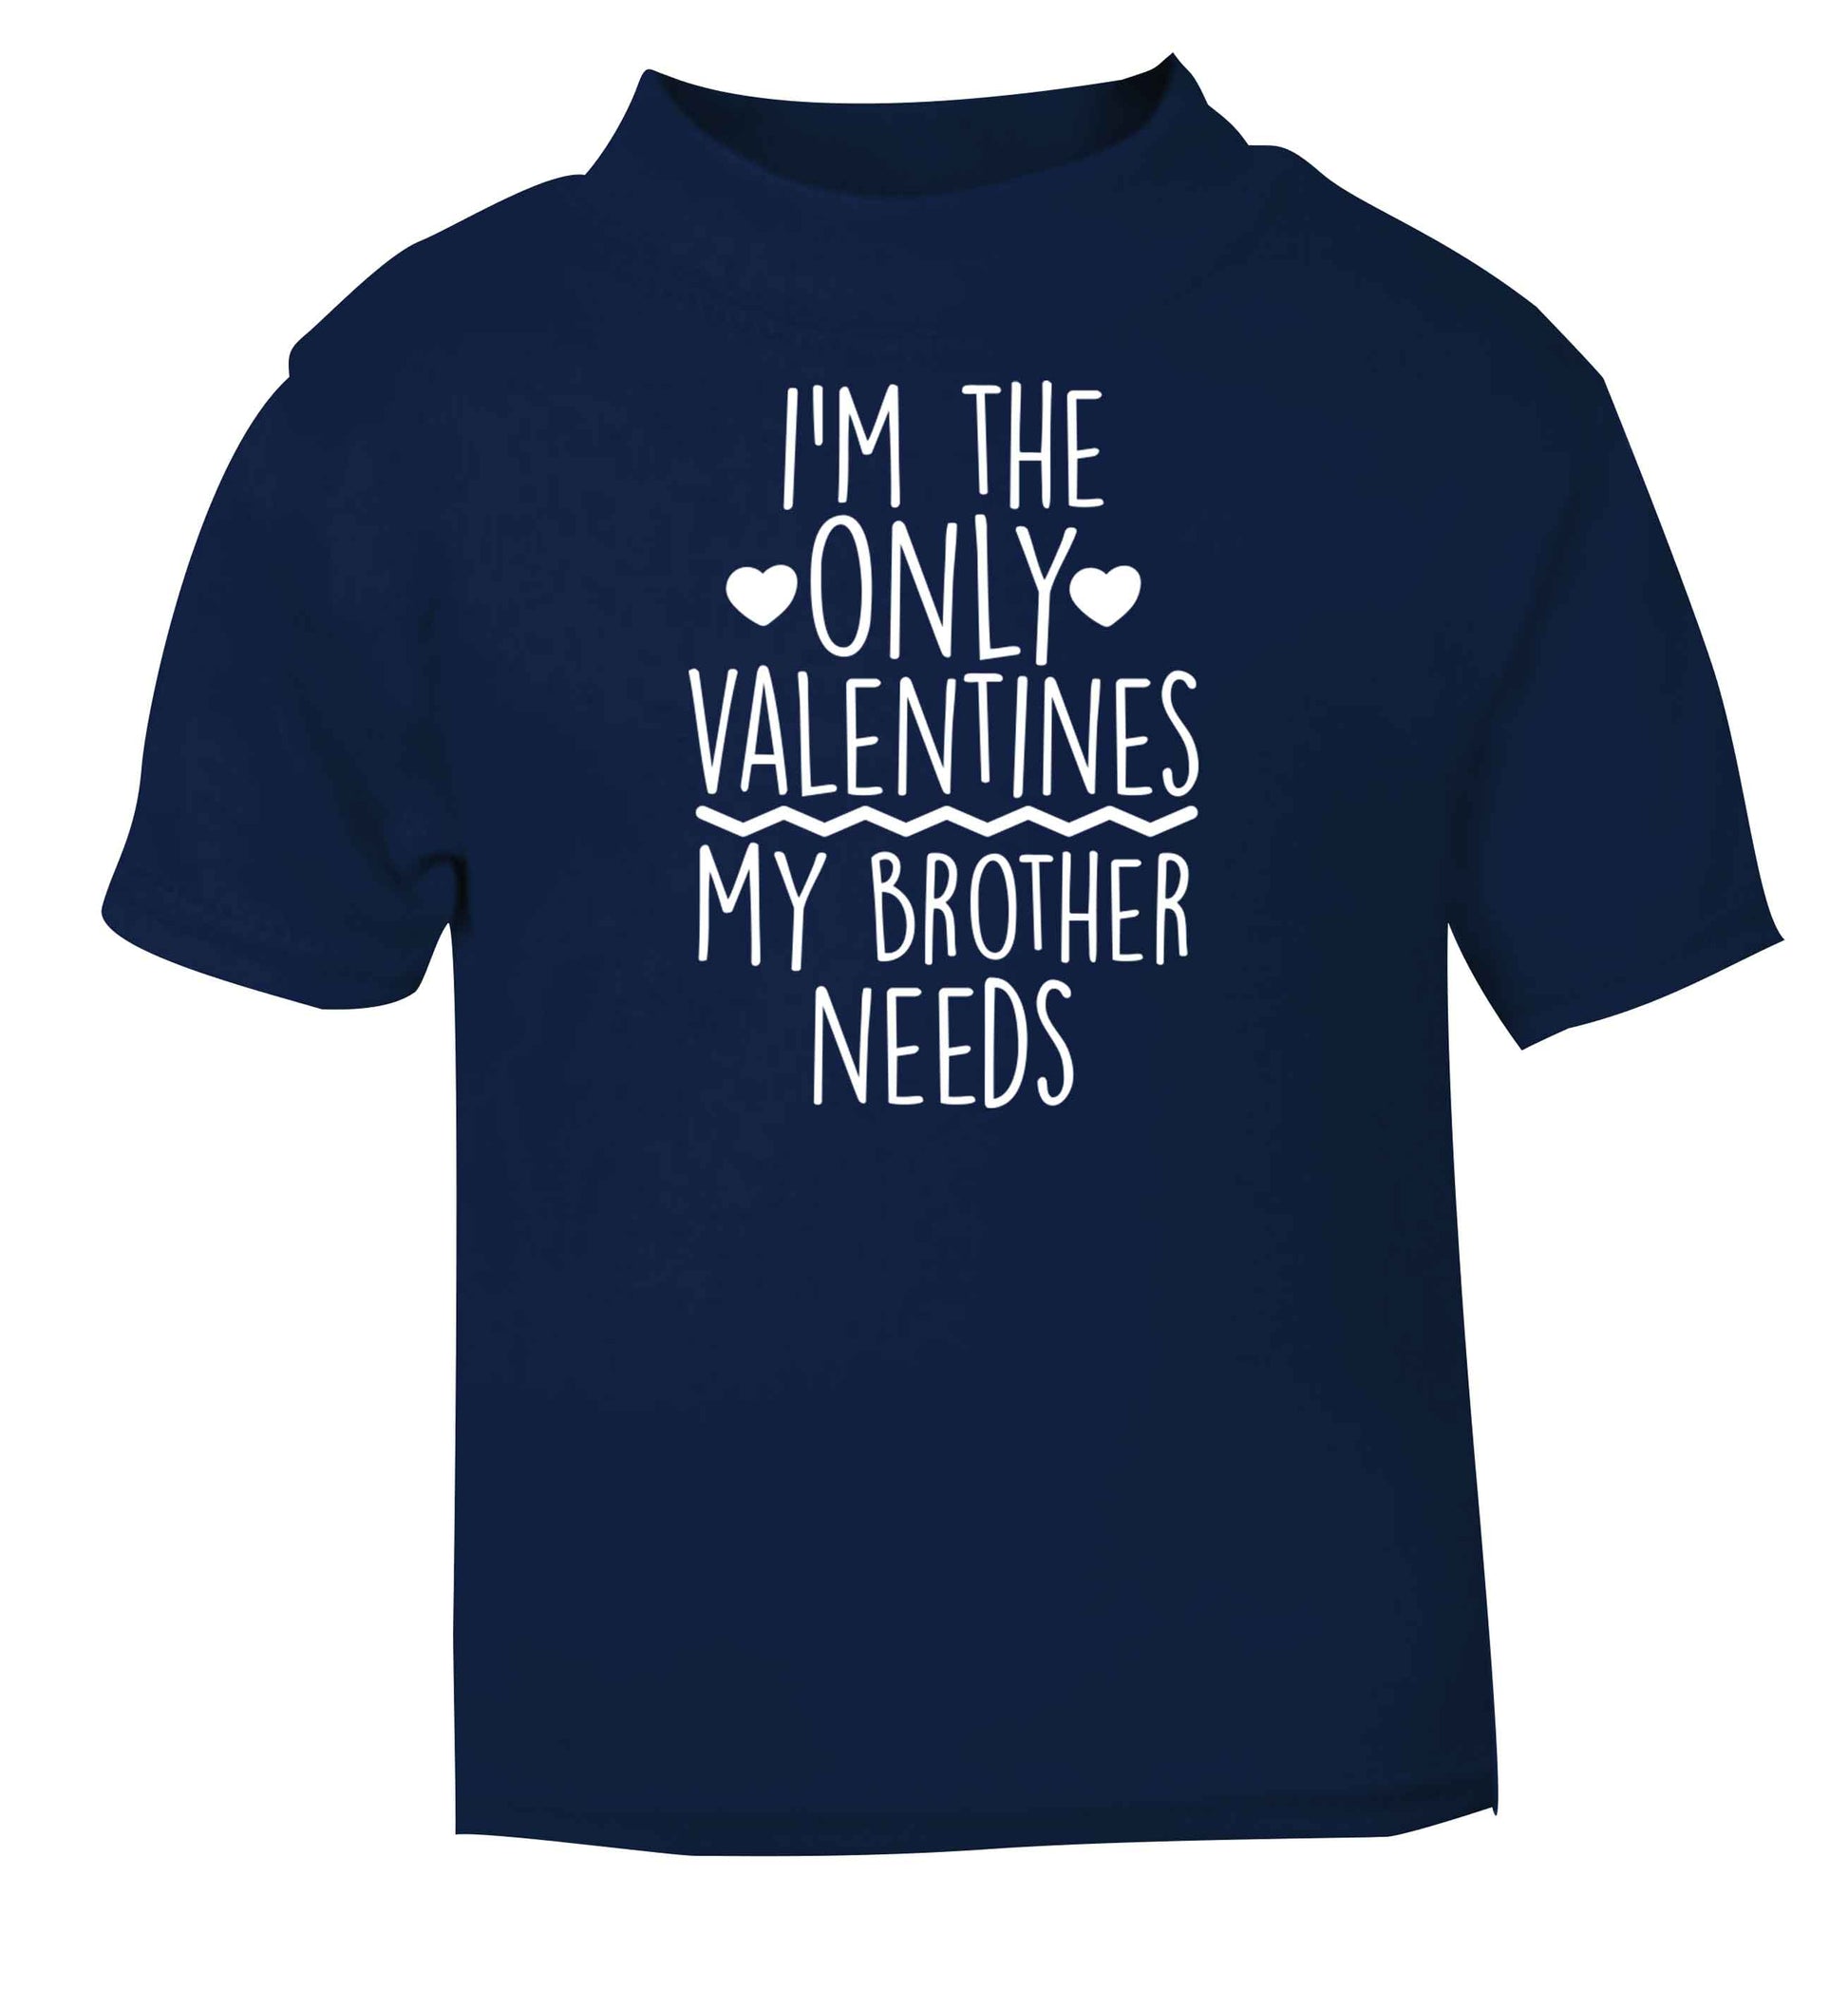 I'm the only valentines my brother needs navy baby toddler Tshirt 2 Years